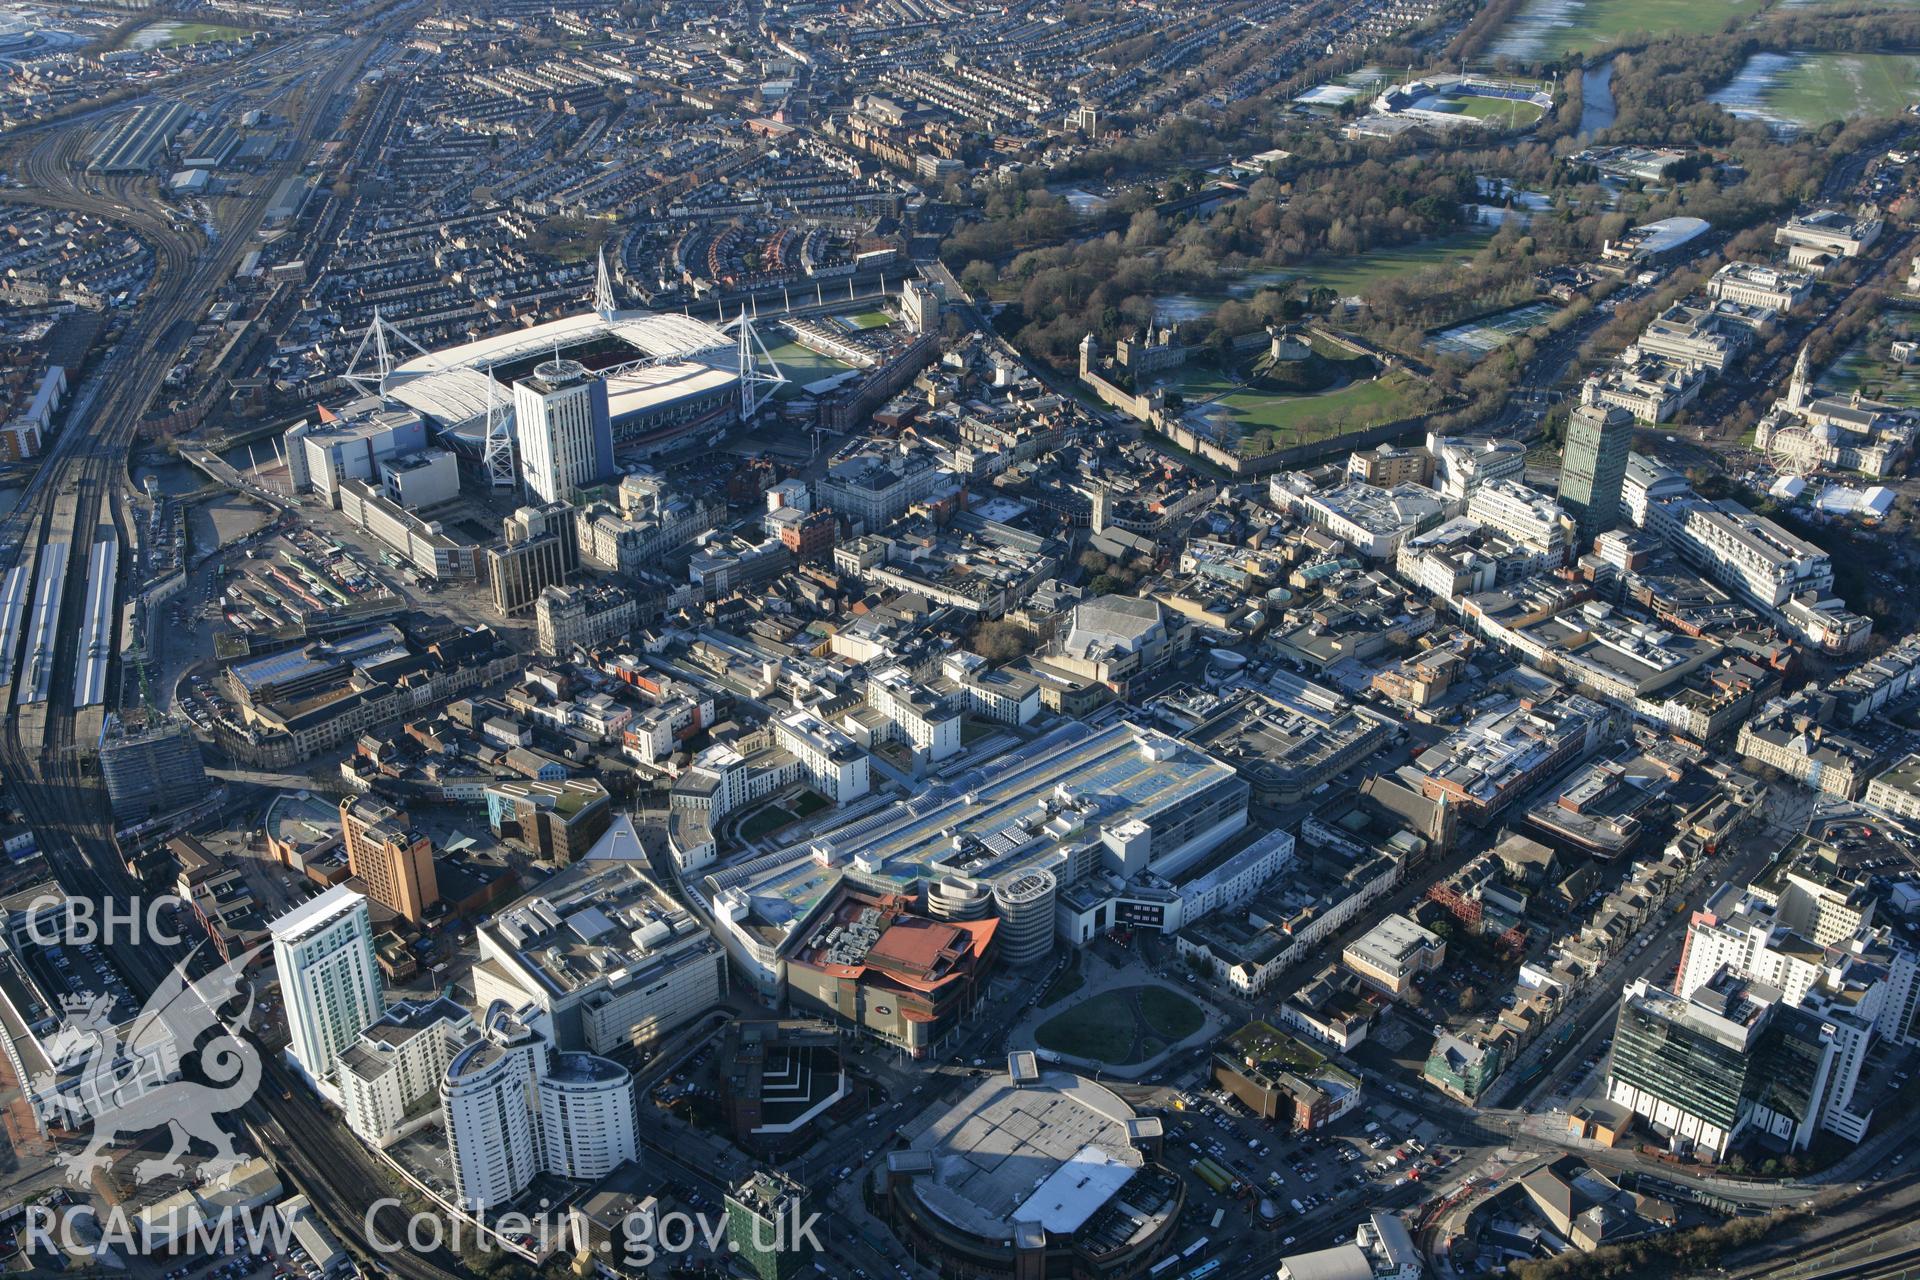 RCAHMW colour oblique photograph of Cardiff city centre from the east, showing the Millenium Stadium. Taken by Toby Driver on 08/12/2010.